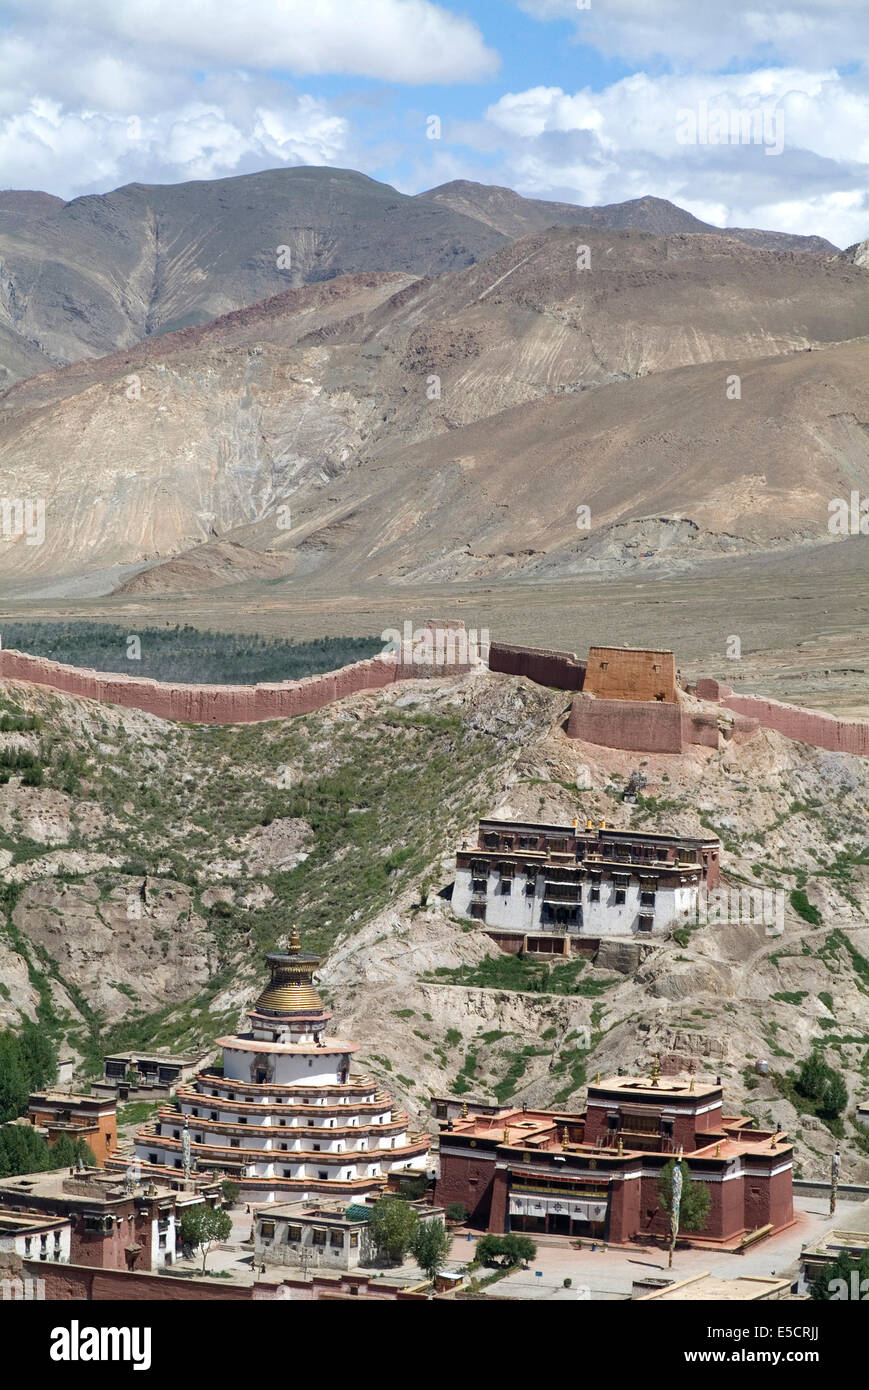 View from the Fort over Gyantse, Kumbum in the distance, Tibet, China Stock Photo